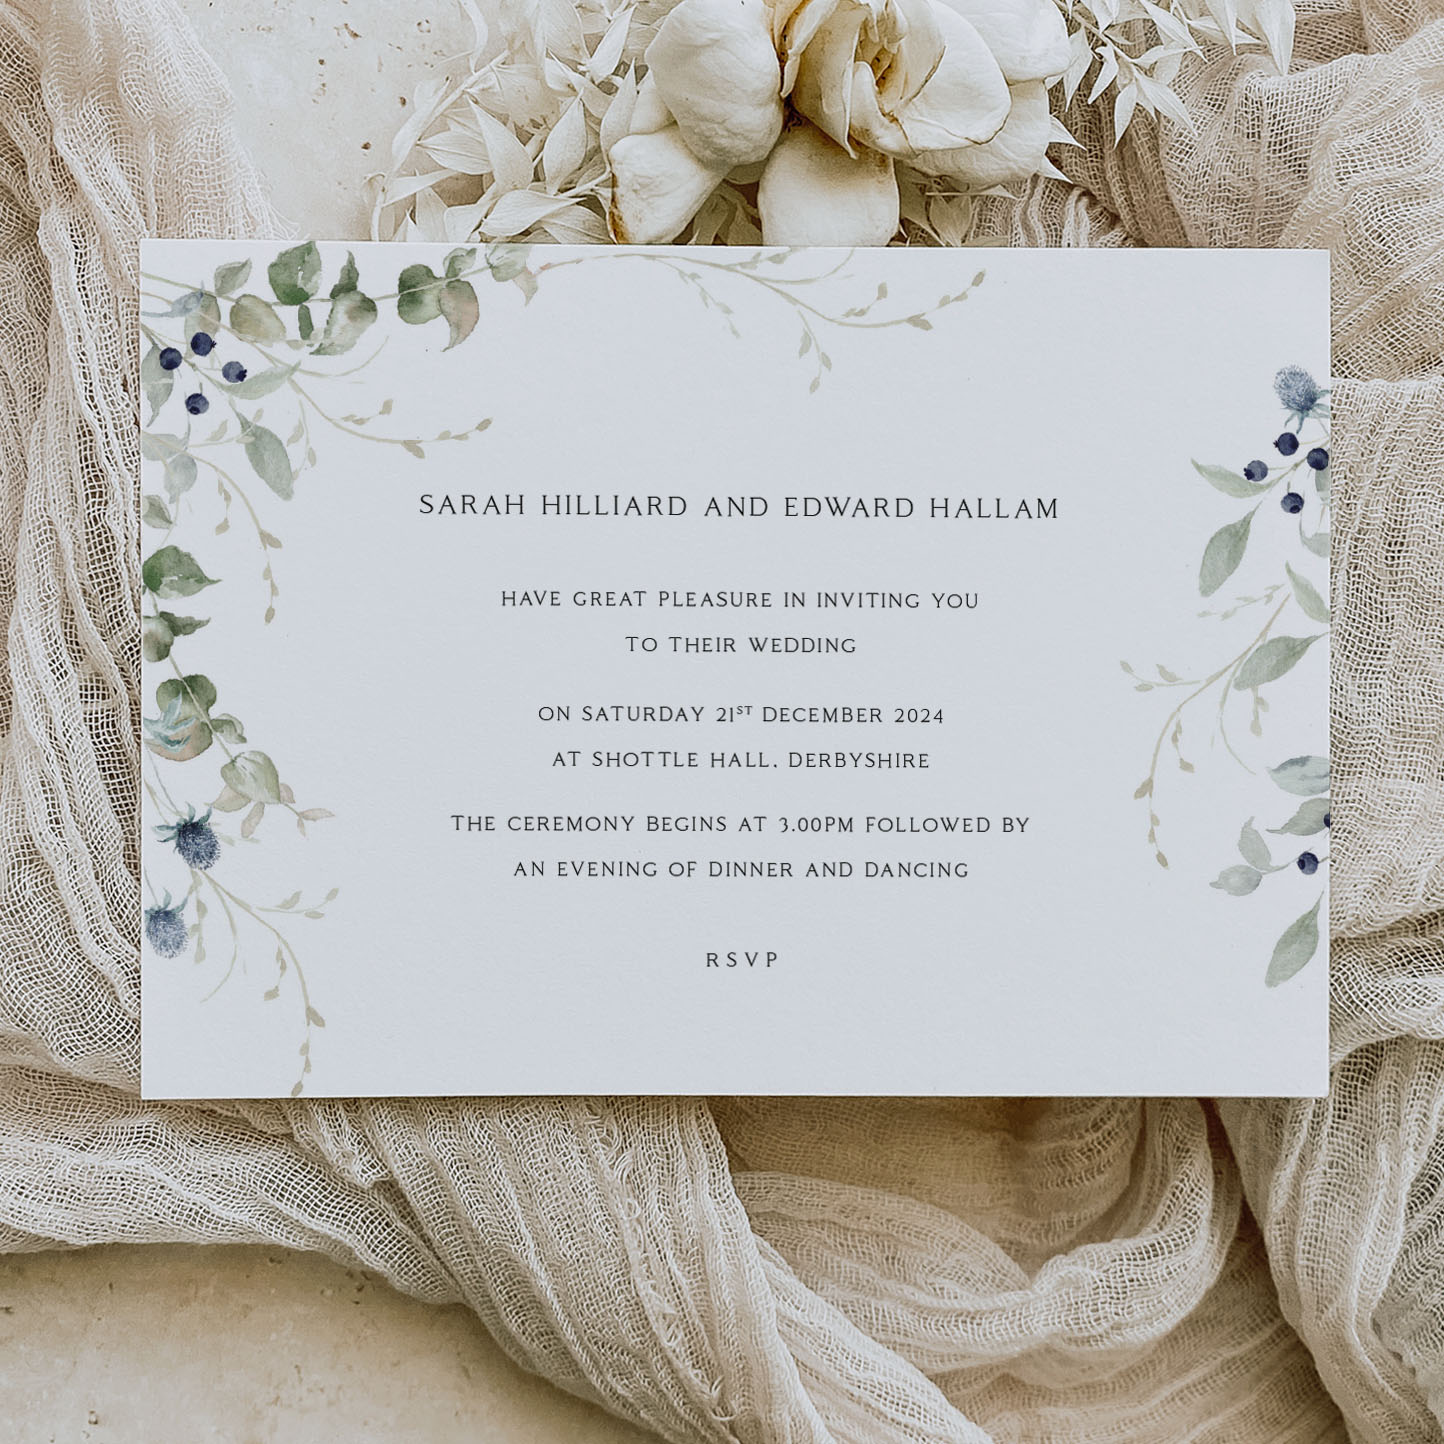 Showing First Frost - winter themed wedding stationery design on cream background